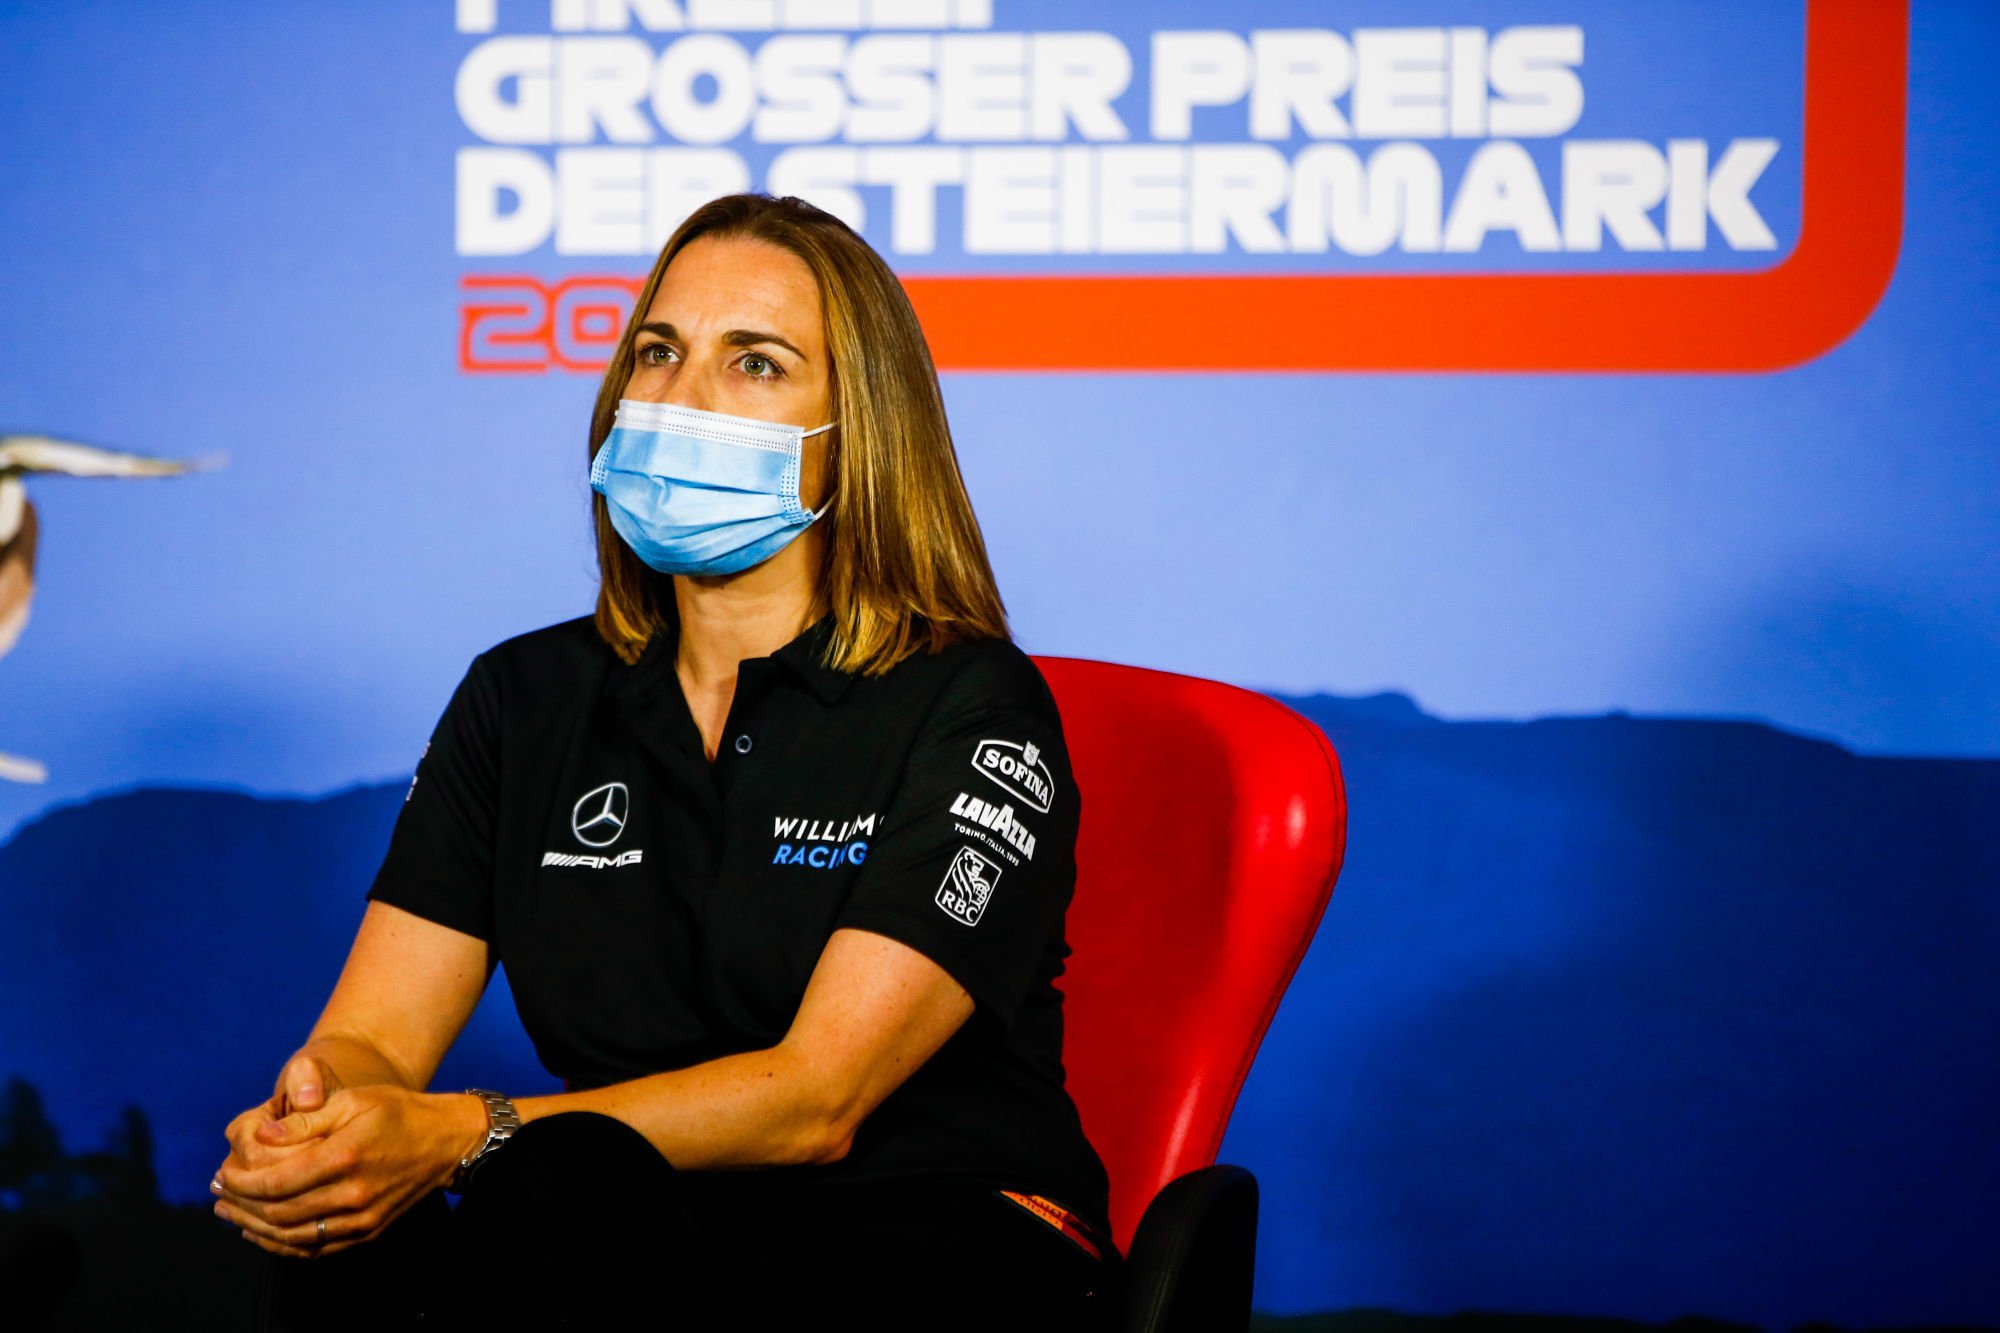 Claire Williams (GBR) Williams Racing Deputy Team Principal in the FIA Press Conference.
Steiermark Grand Prix, Friday 10th July 2020. Spielberg, Austria.
FIA Pool Image for Editorial Use Only 

Photo by Icon Sport